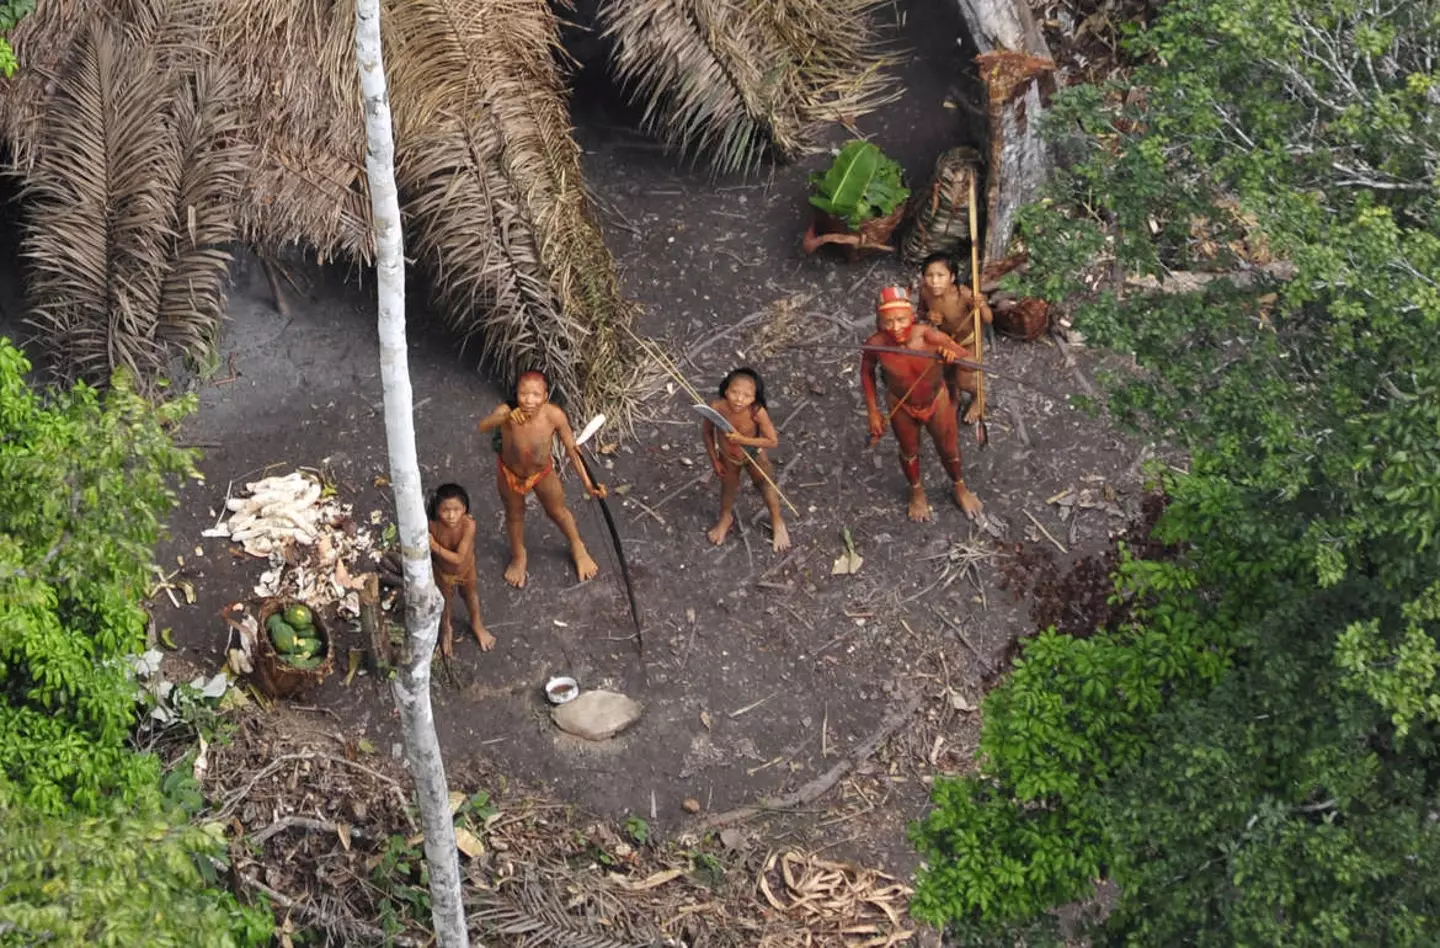 Meirelles also noted how the uncontacted tribes of the region were in danger from illegal loggers in Peru.